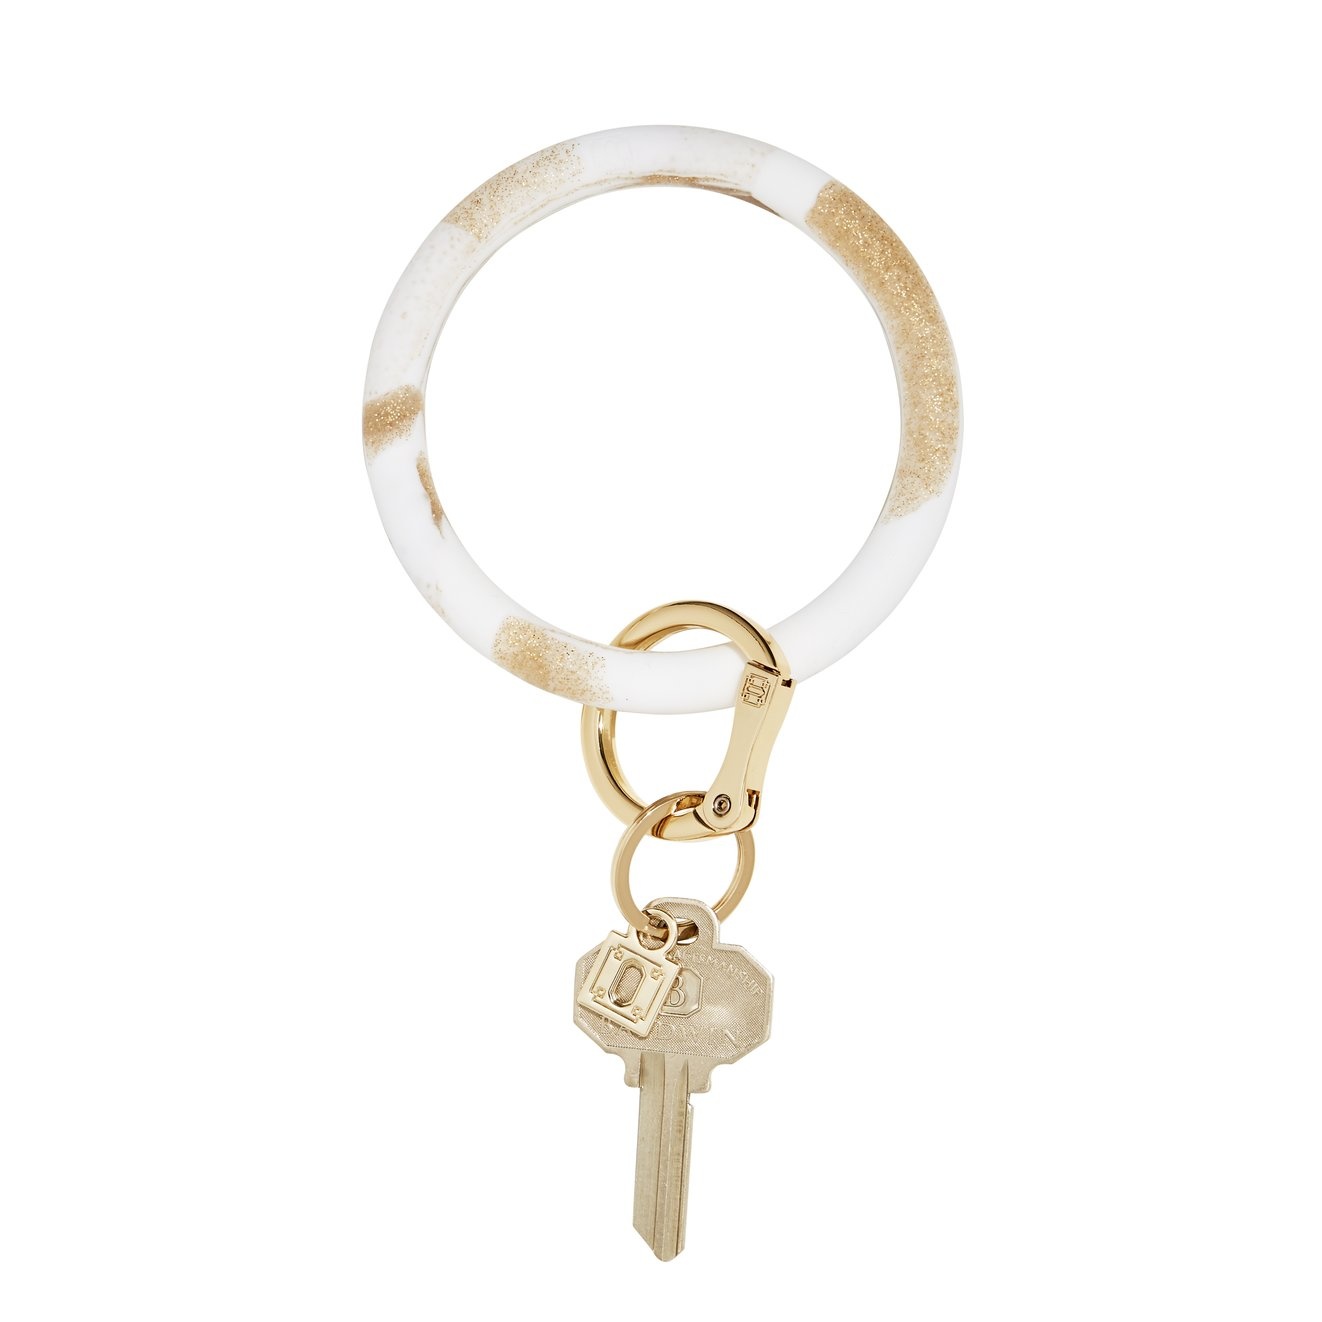 Oventure Silicone Big O Key Ring in Gold Rush Marble - Her Hide Out